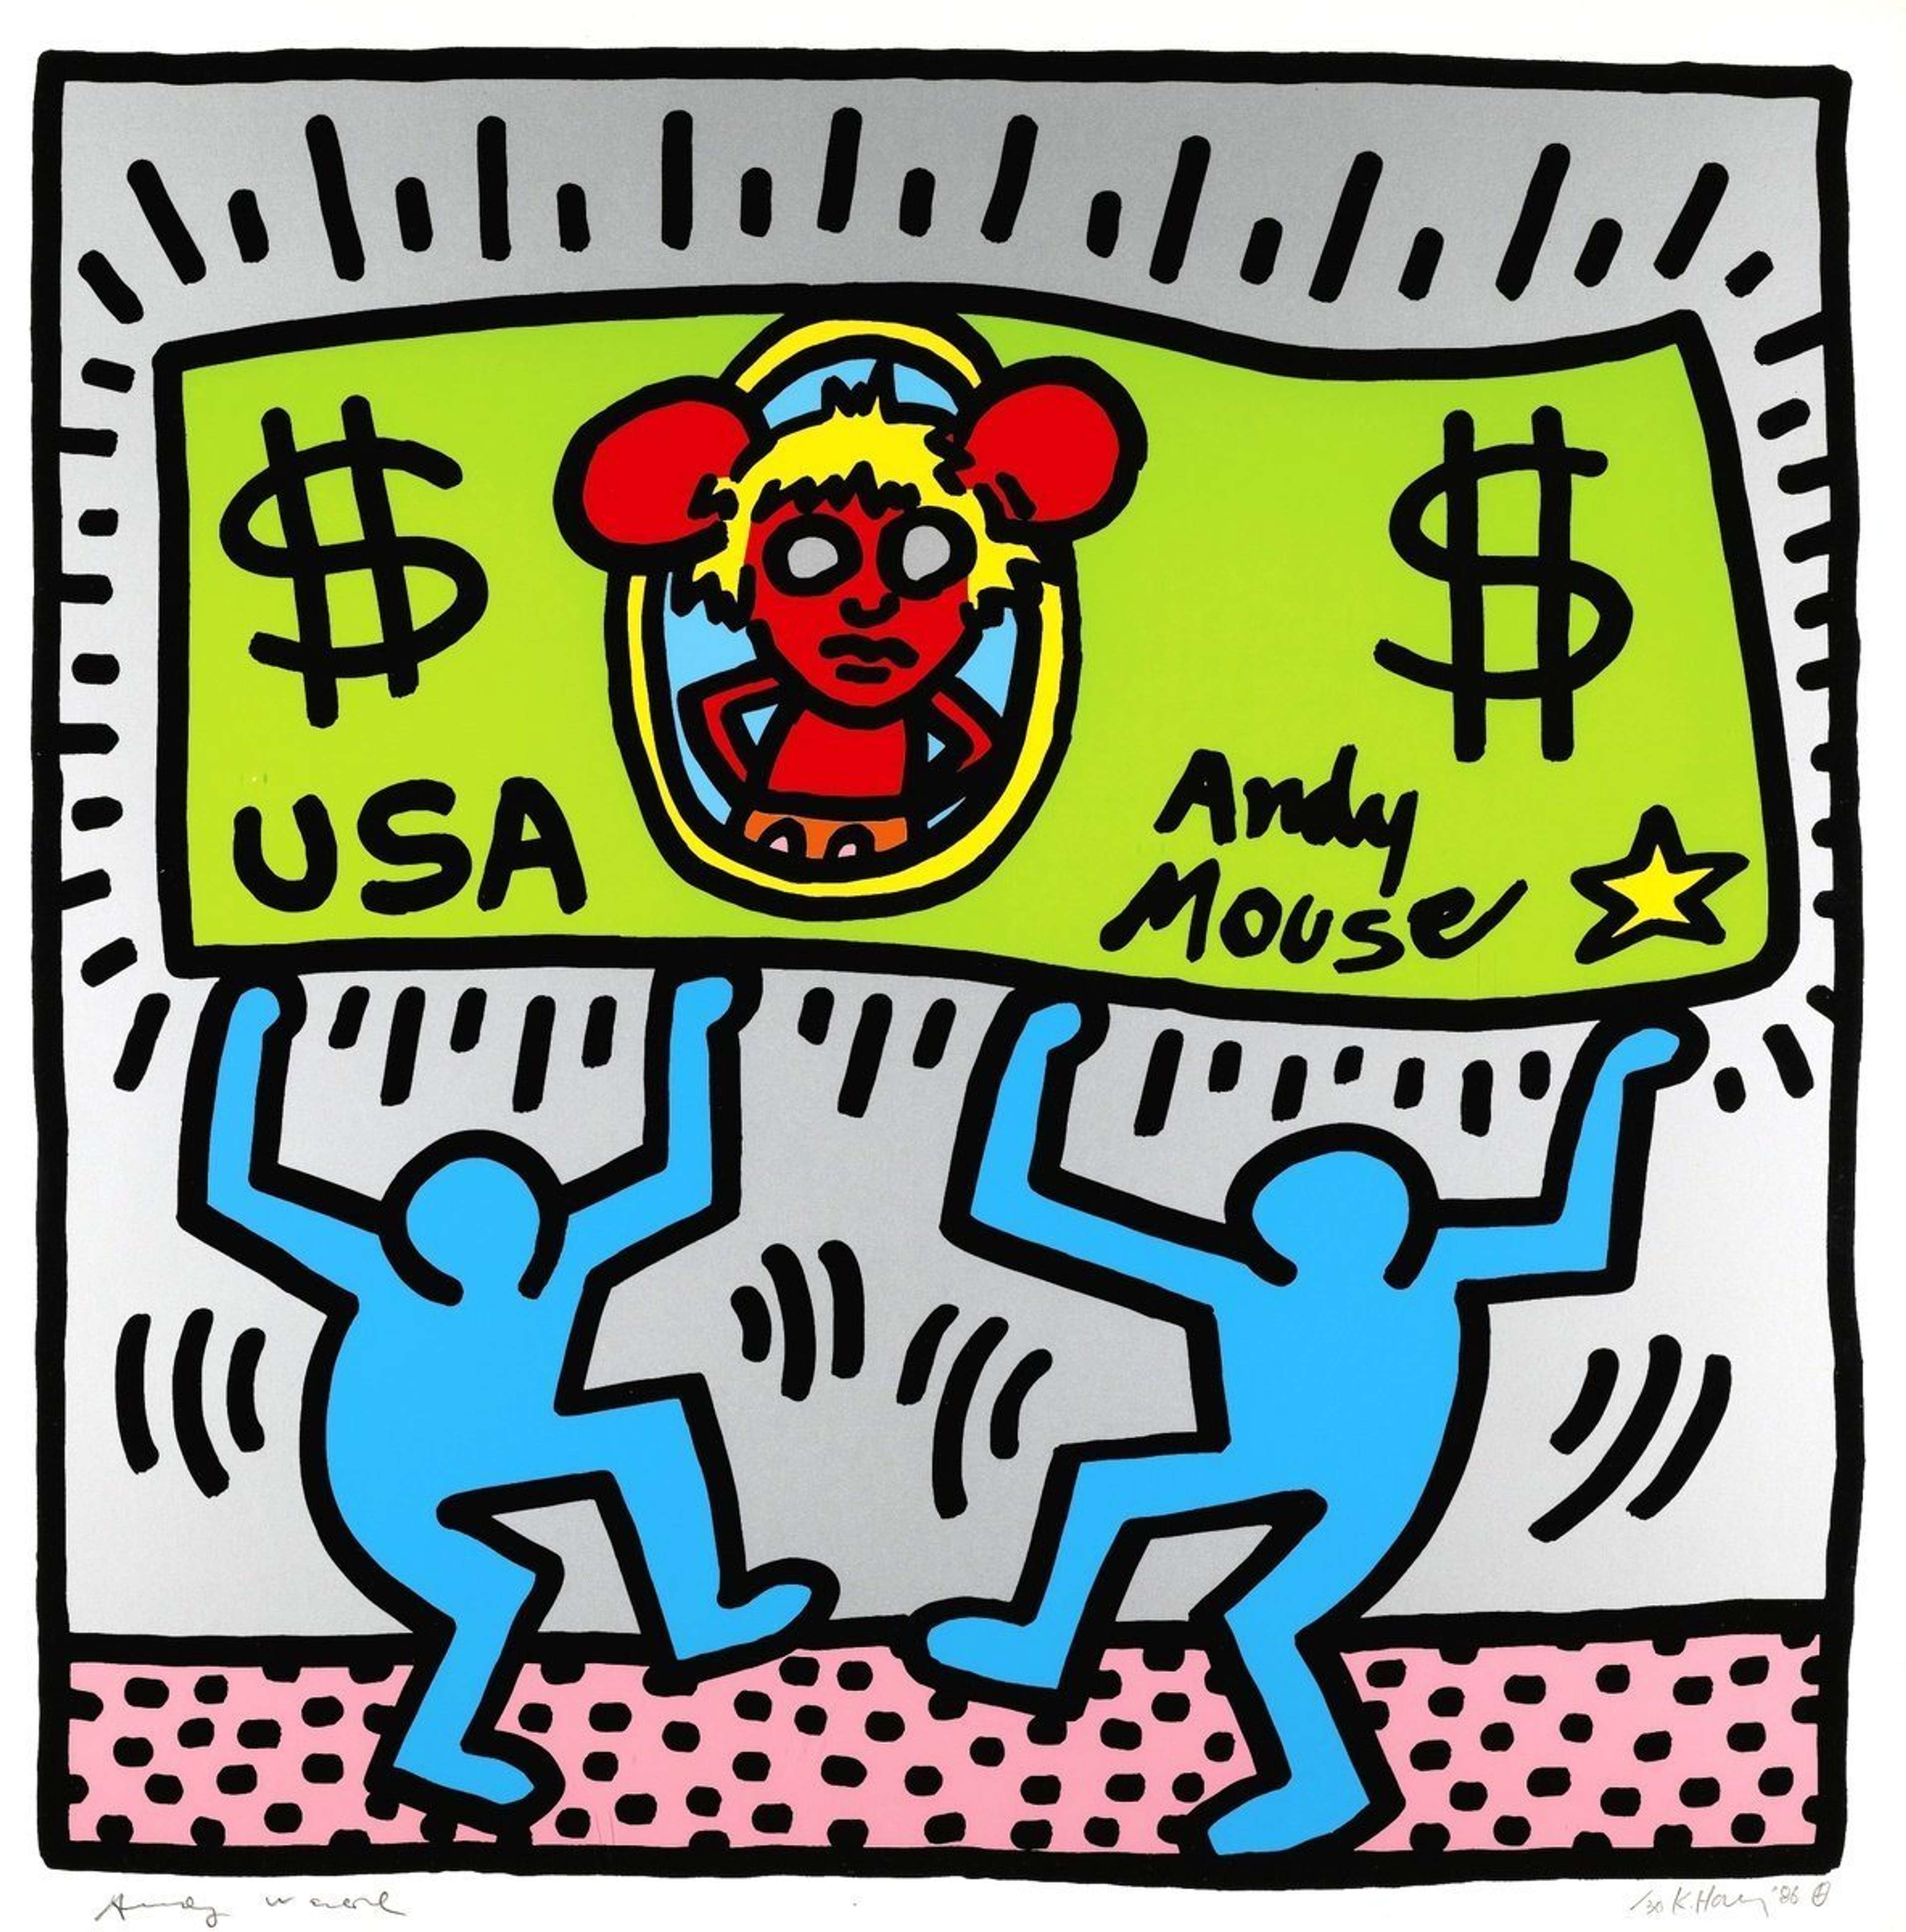 Andy Mouse 3 - Signed Print